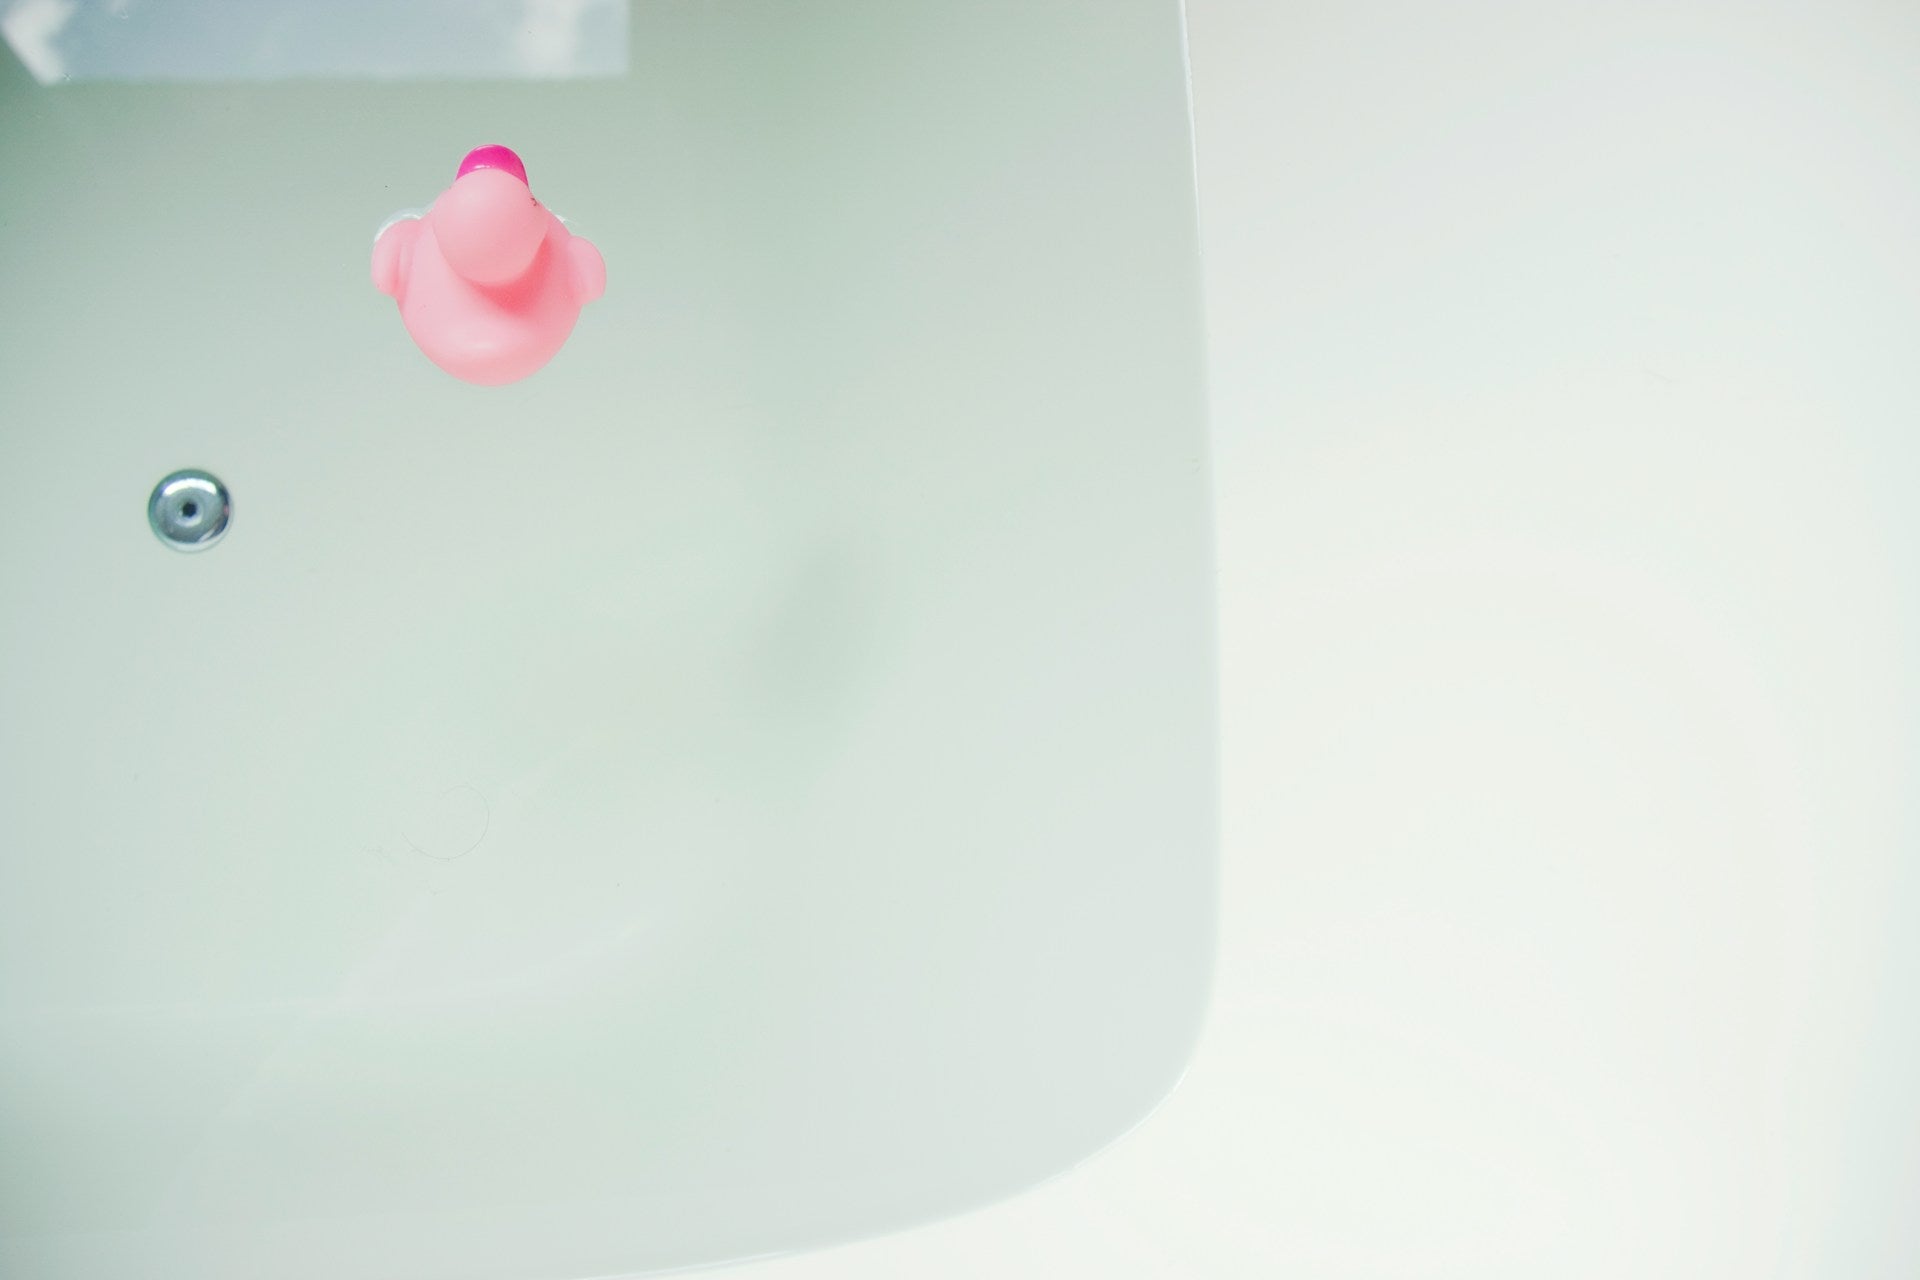 A bathtub of water with a pink rubber duck.